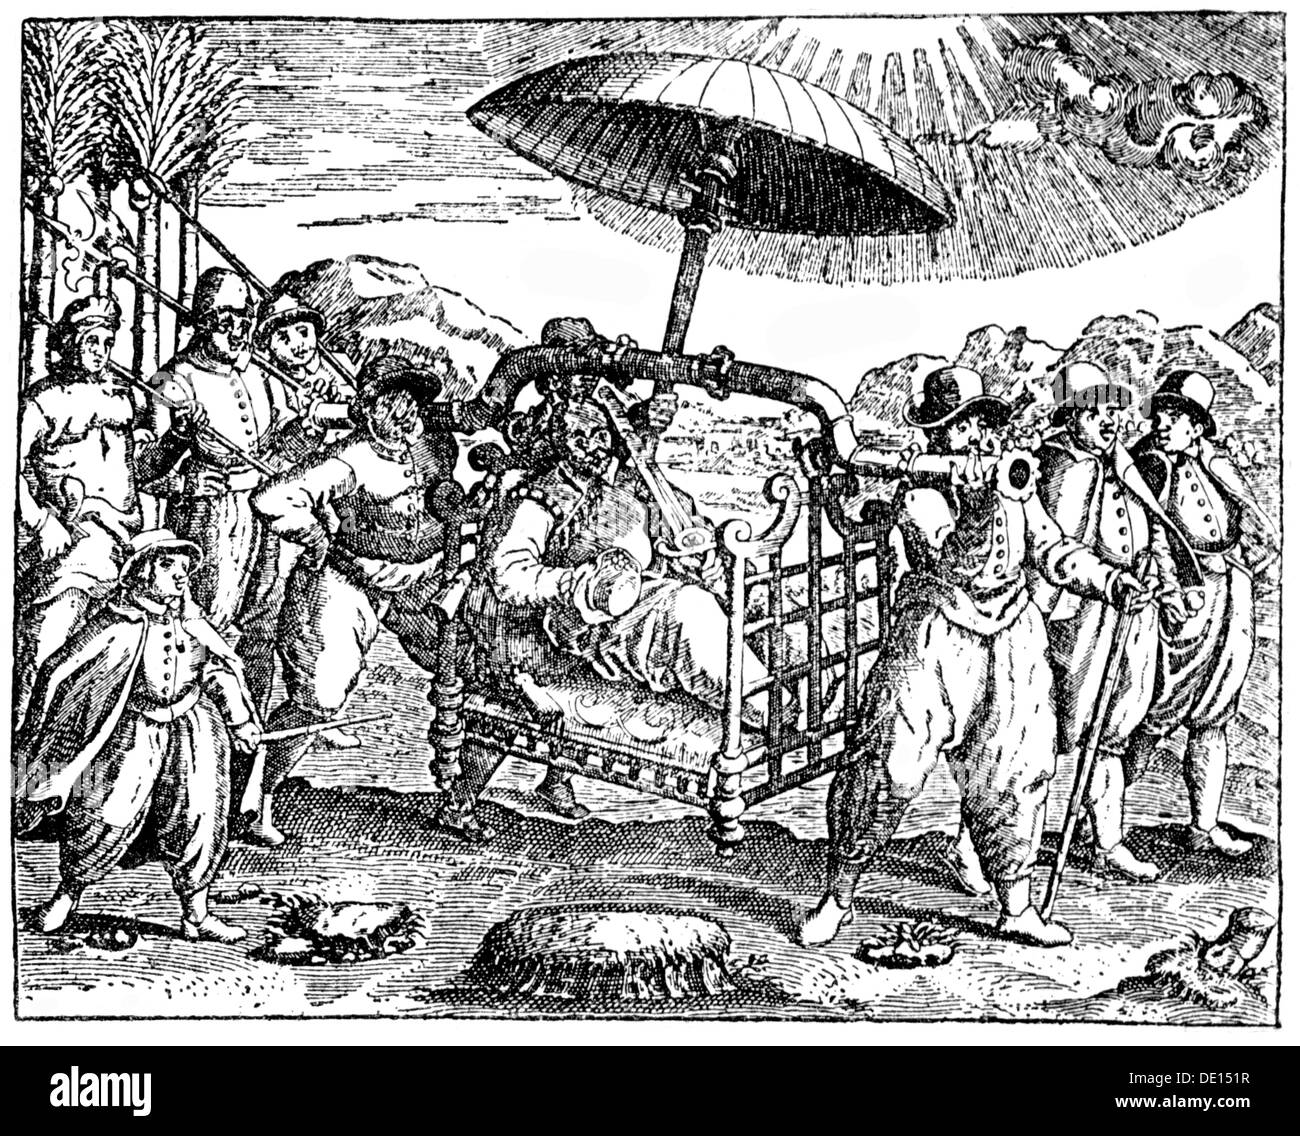 transport / transportation, sedan chair, leader of a Portuguese expedition in India is carried in a sedan chair, woodcut, 16th century, 16th century, Asia, India, Portugal, expedition, expeditions, colonialism, transporting, servant, servants, manservant, menservants, carrying, carry, shade, shades, sunshade, sunshades, protection, half length, going, go, walking, walk, transport, transportation, leader, leaders, sedan chair, sedans, sedan chairs, woodcut, woodcuts, historic, historical, man, men, male, people, Additional-Rights-Clearences-Not Available Stock Photo